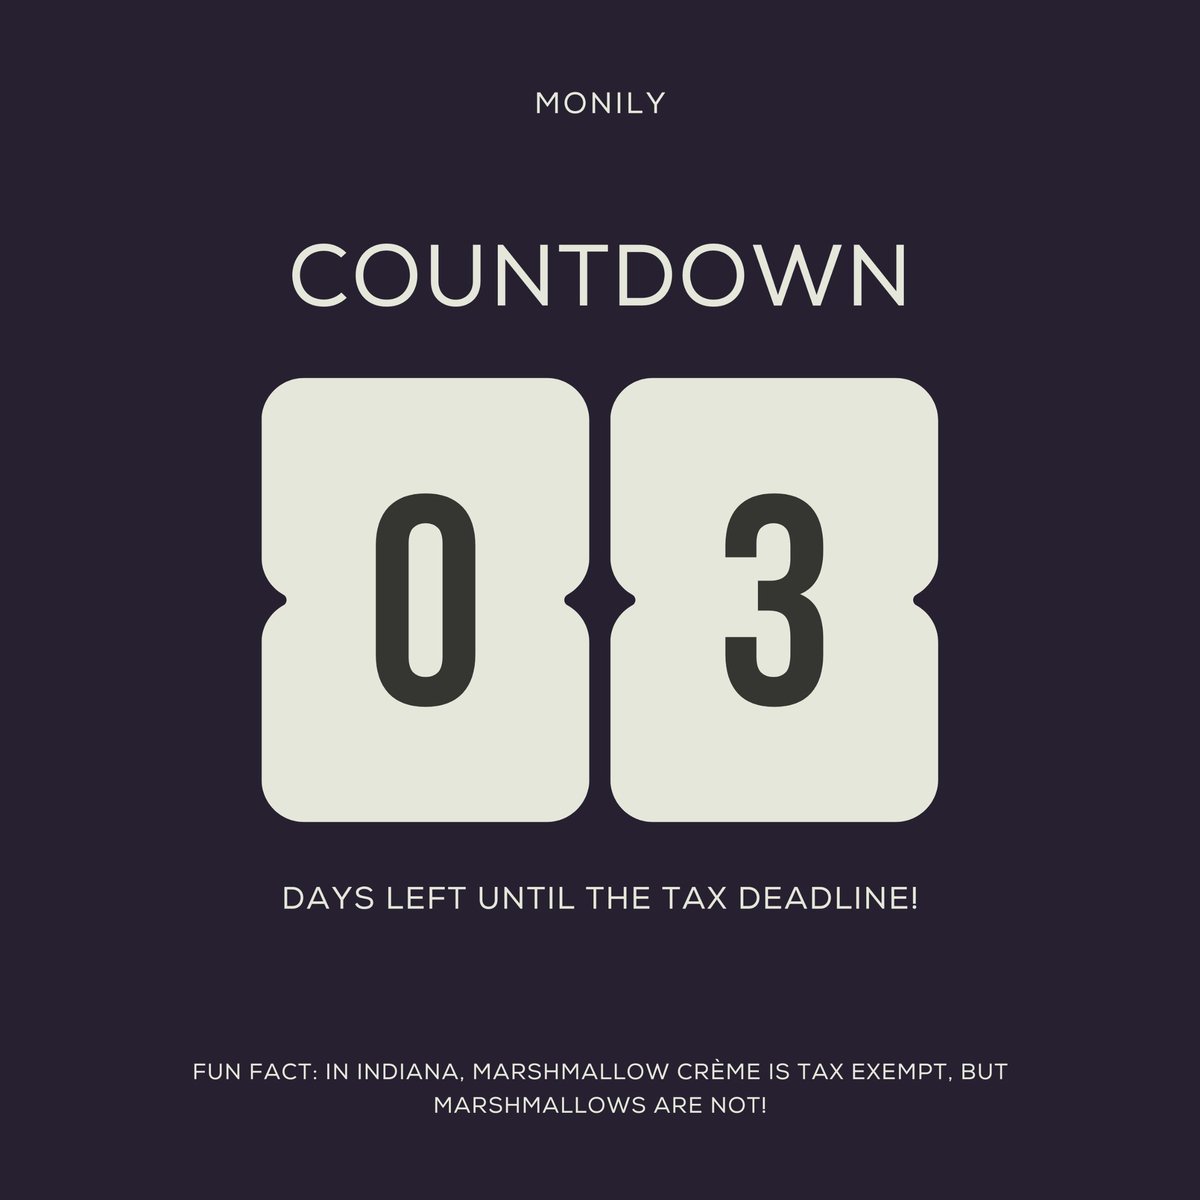 As we approach the end of the road, you may want to rethink that extension. You still have time! The countdown has begun...

Psst... Did you know this fun fact about marshmallows and taxes? 

#tax #taxdeadline #taxfiling #monilyaccounting